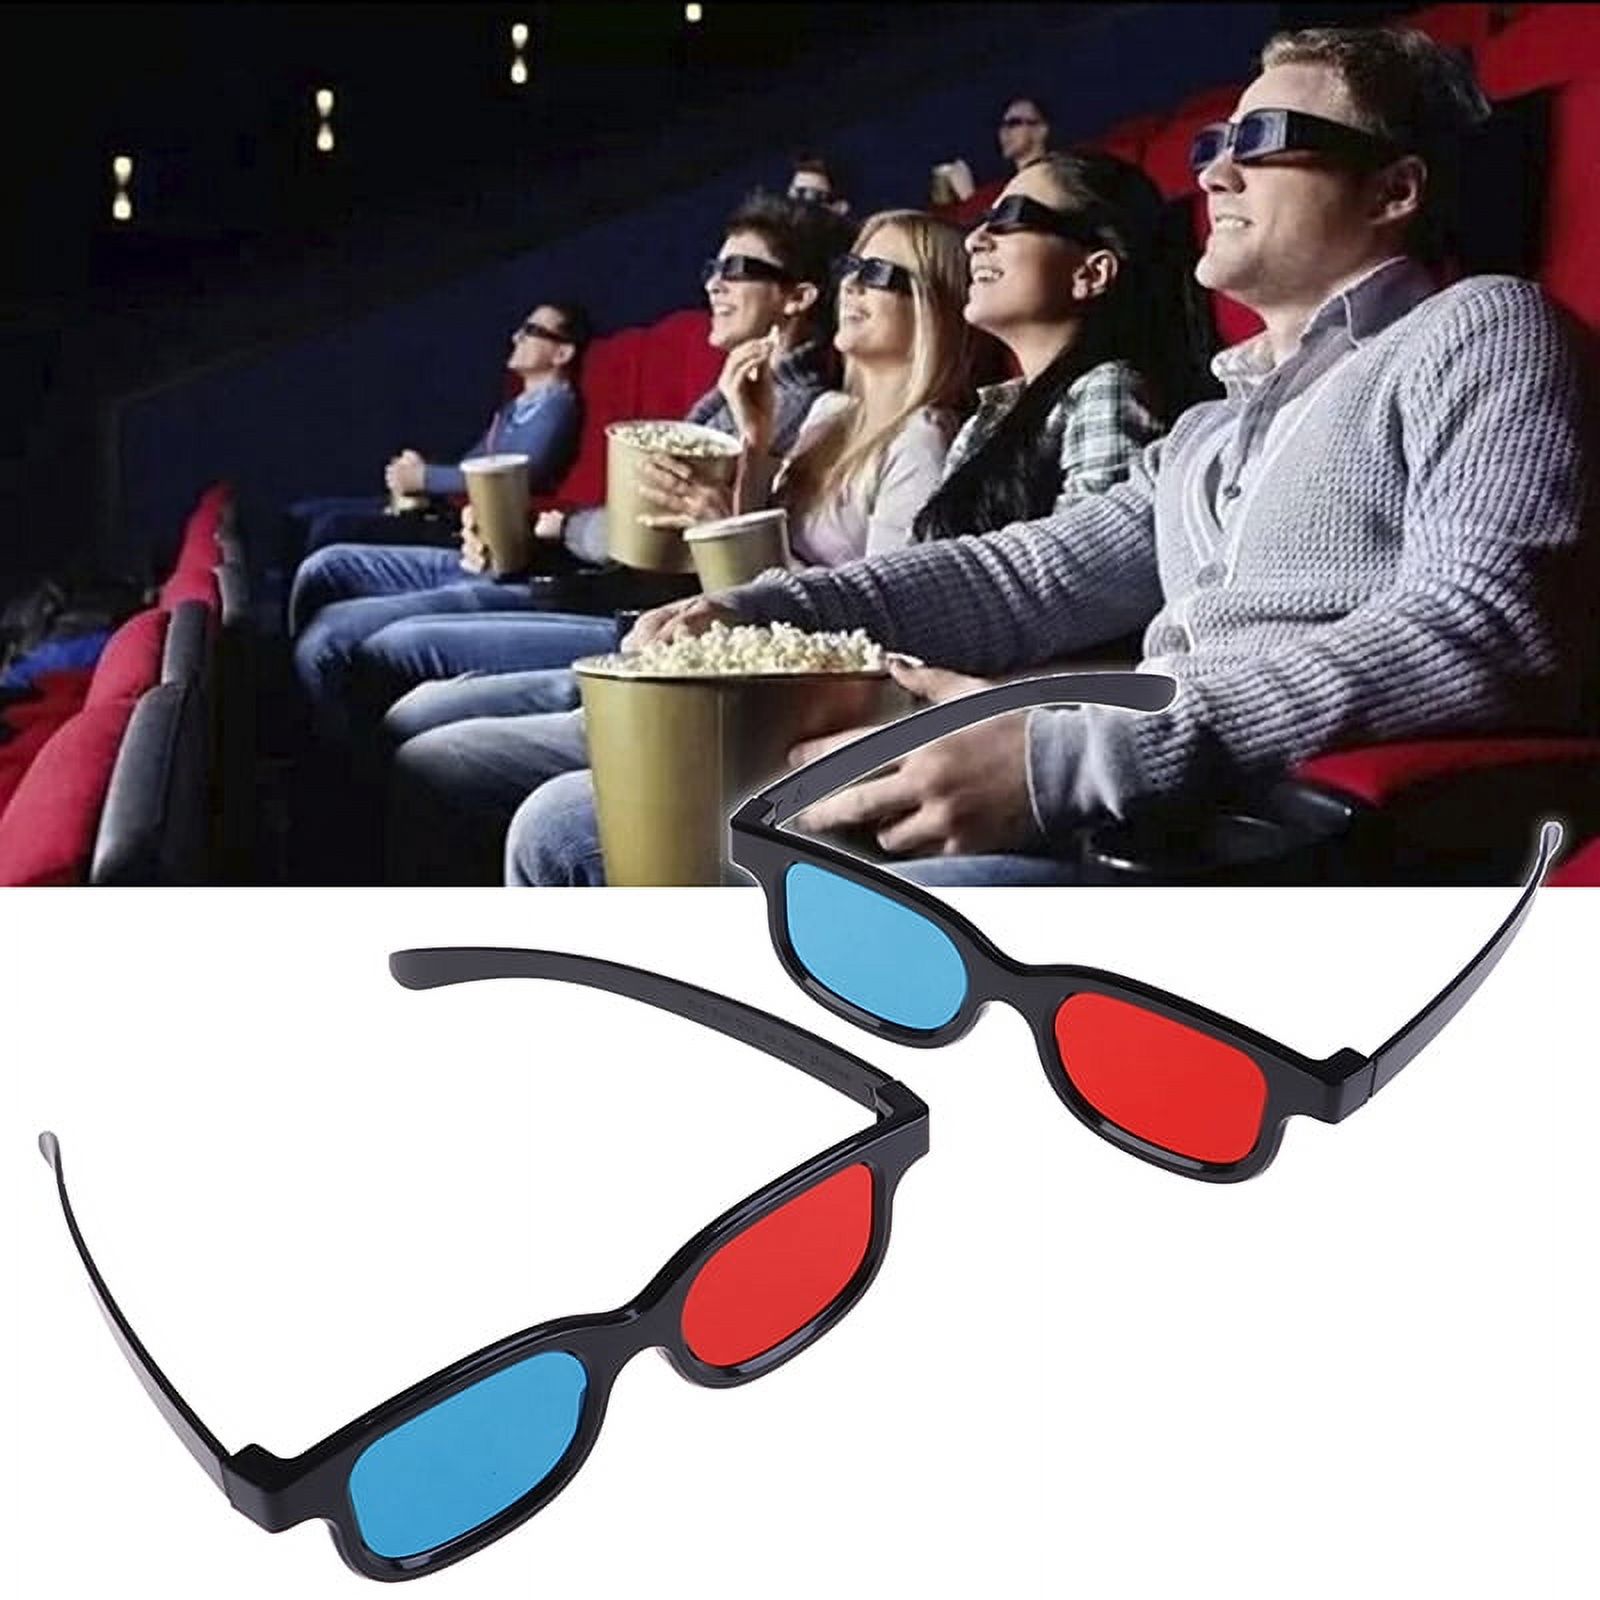 Universal red blue 3d glasses for dimensional anaglyph movie game - image 2 of 9